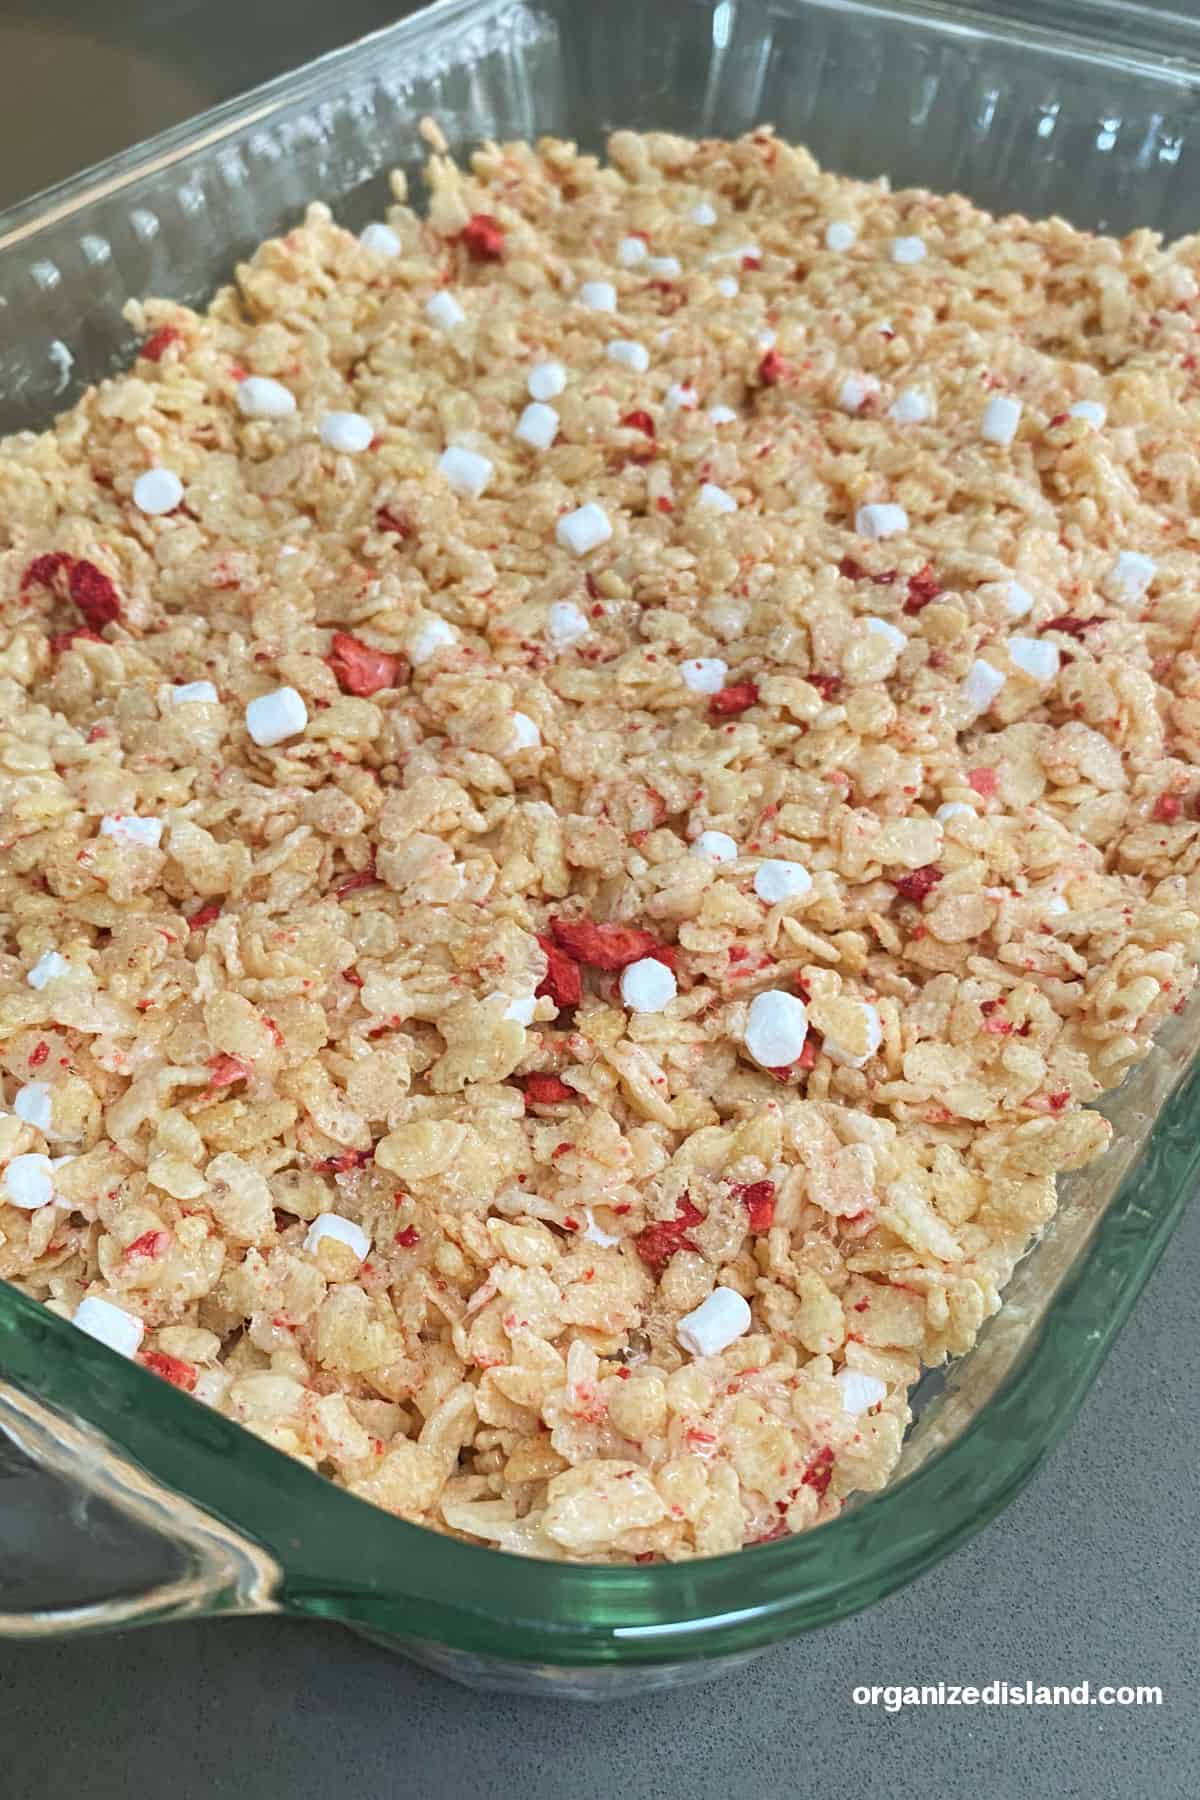 How to Make Strawberry Rice Krispie Treats step 5 pouring into baking pan.